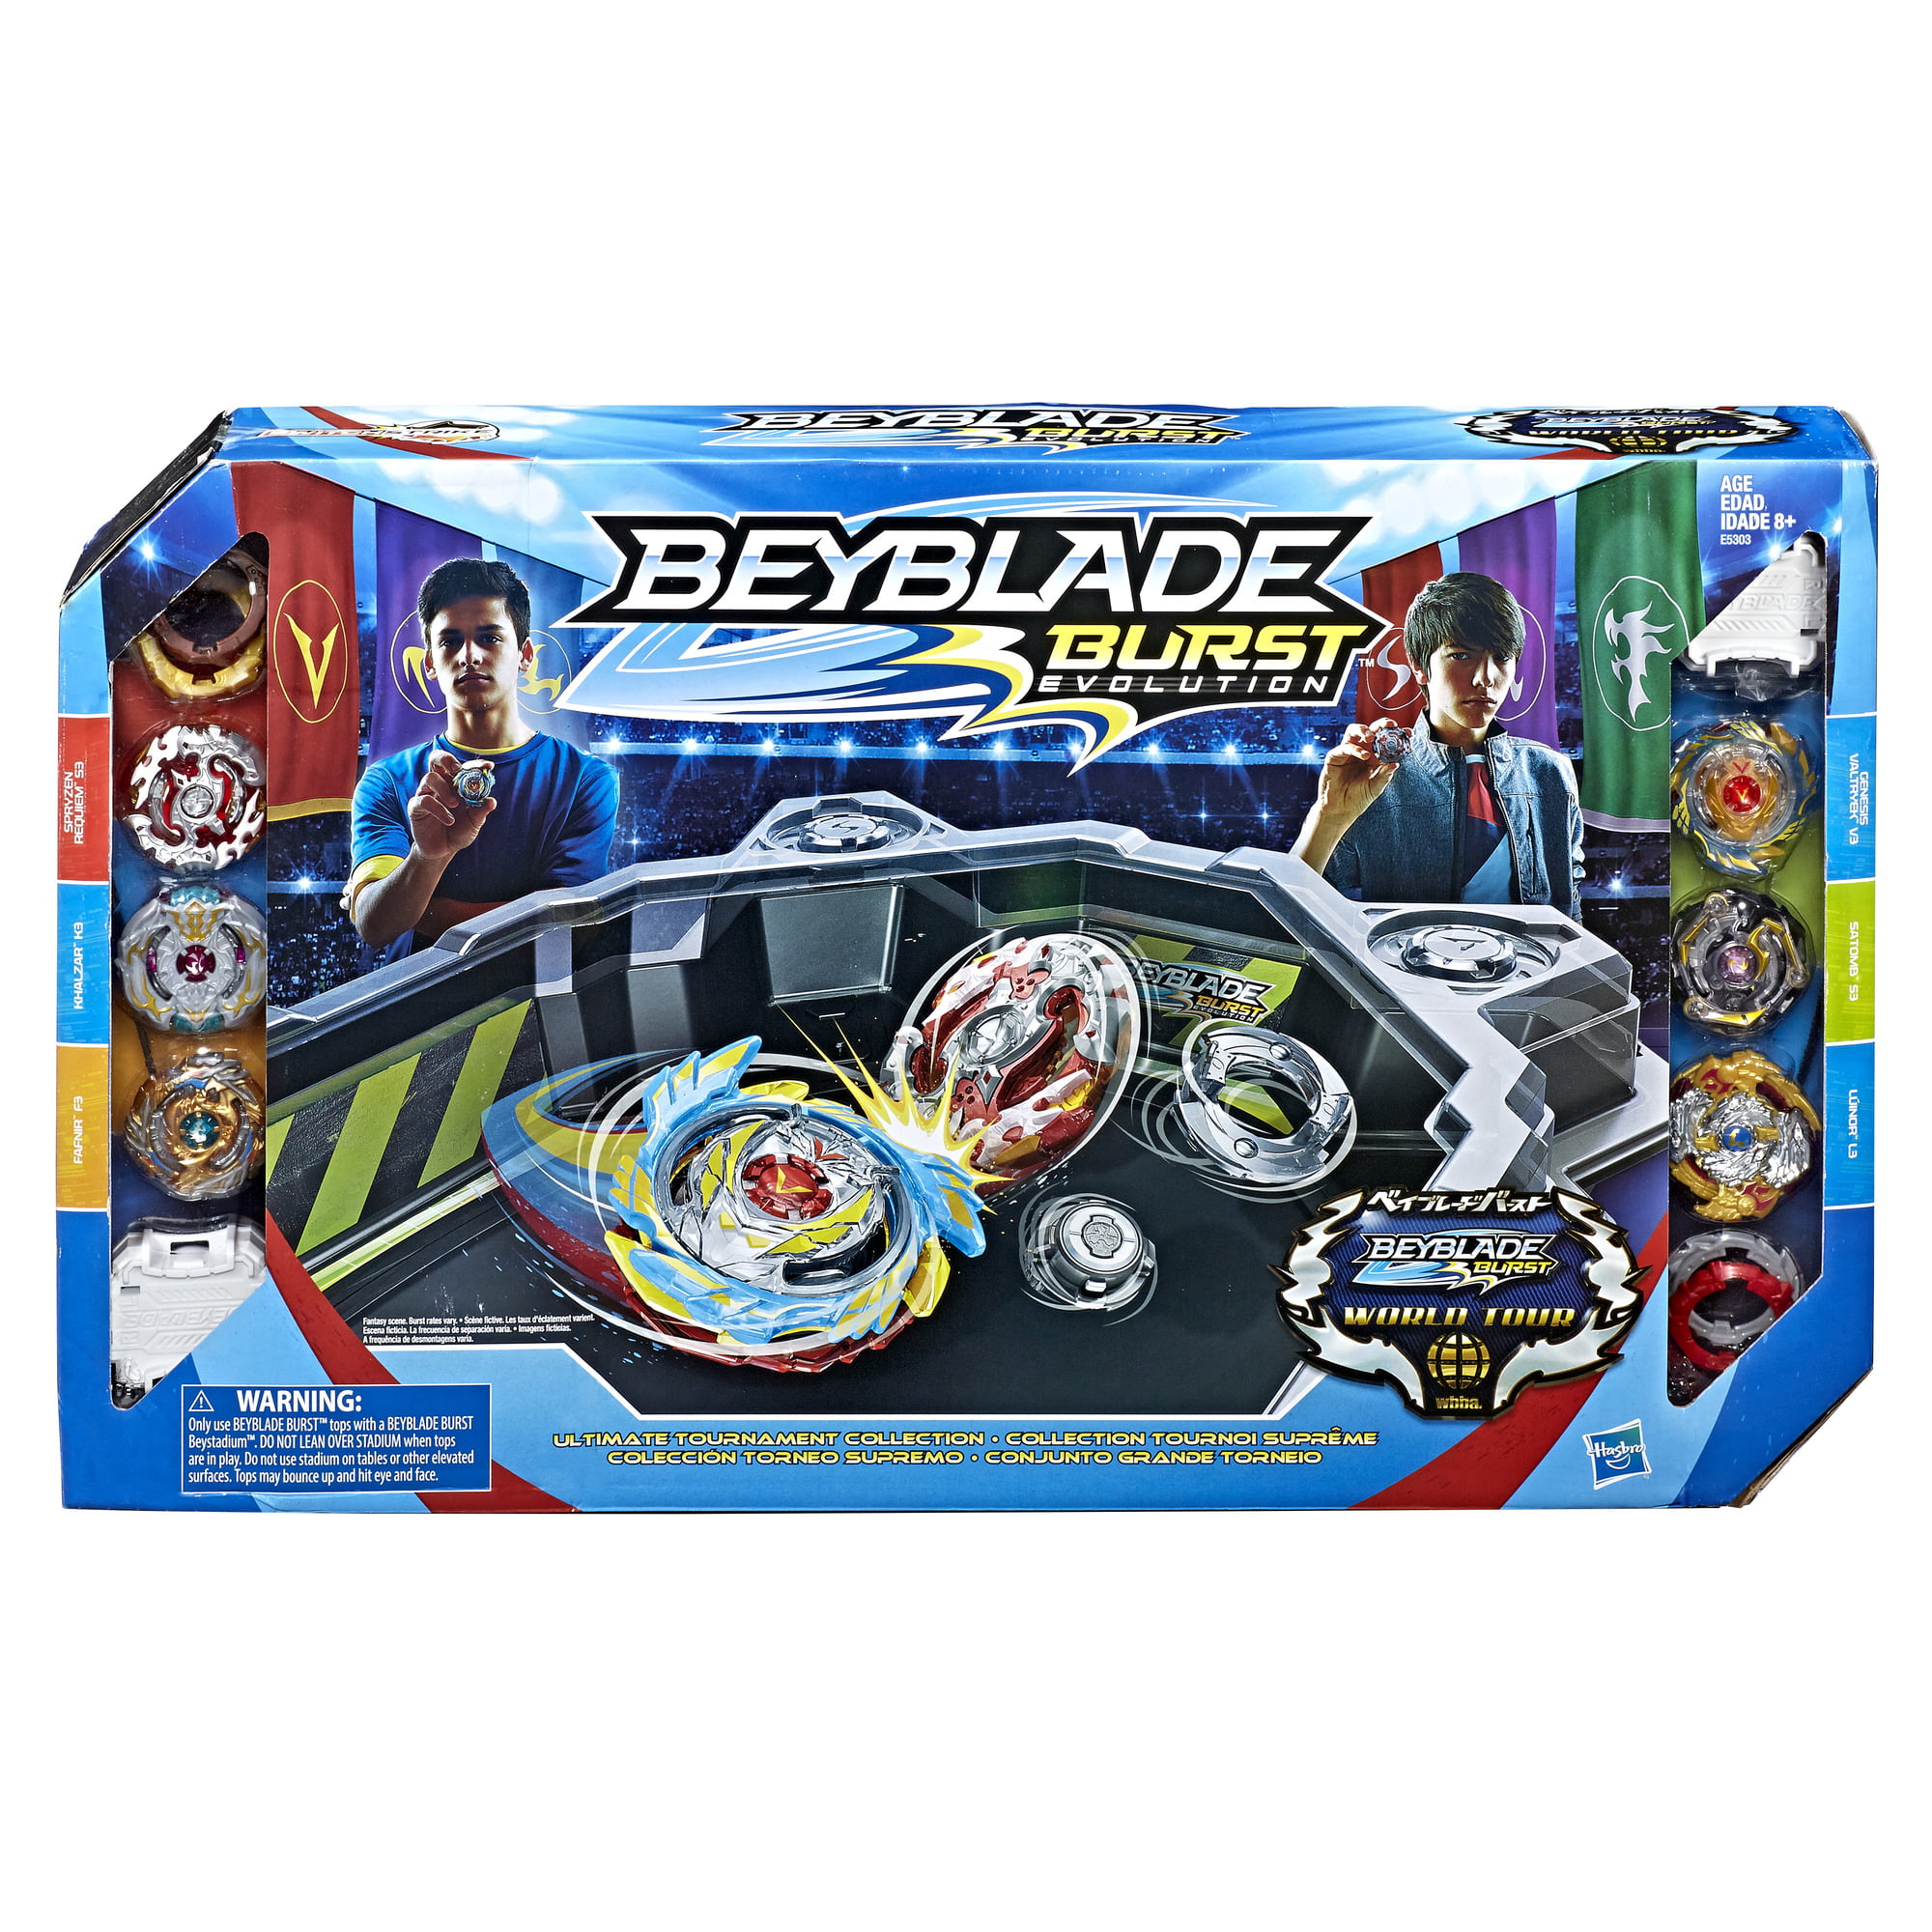 every beyblade in the world